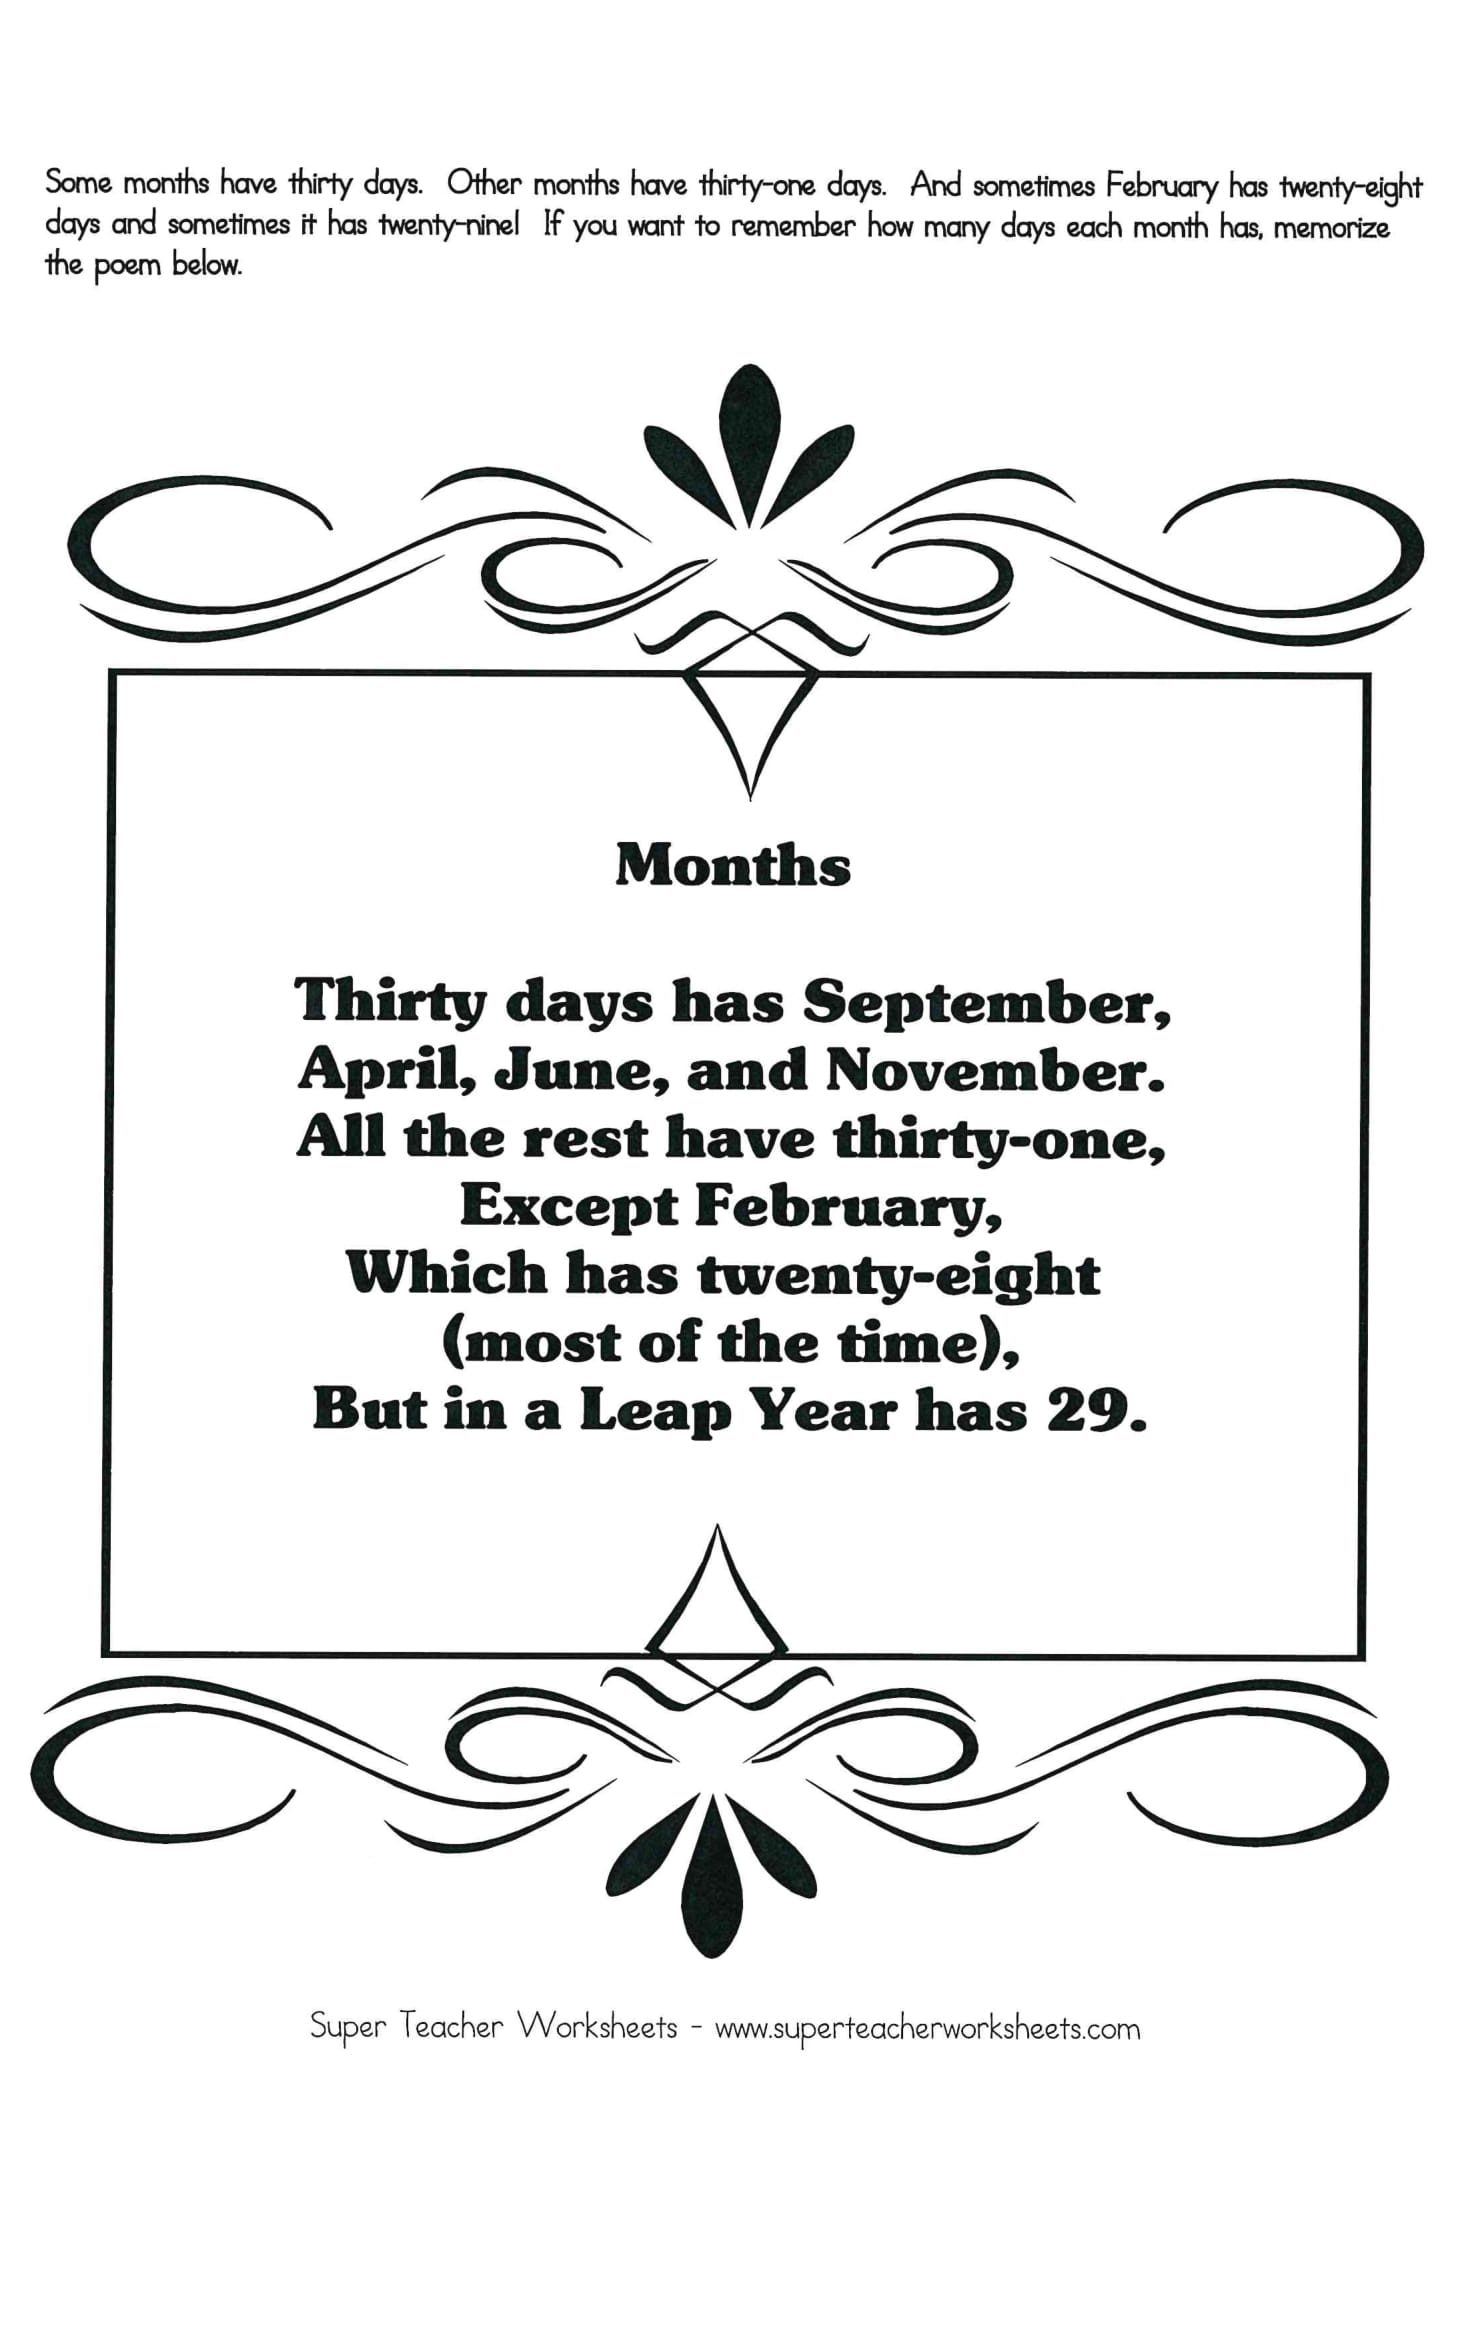 Poem To Remember The Months 1 Edited 